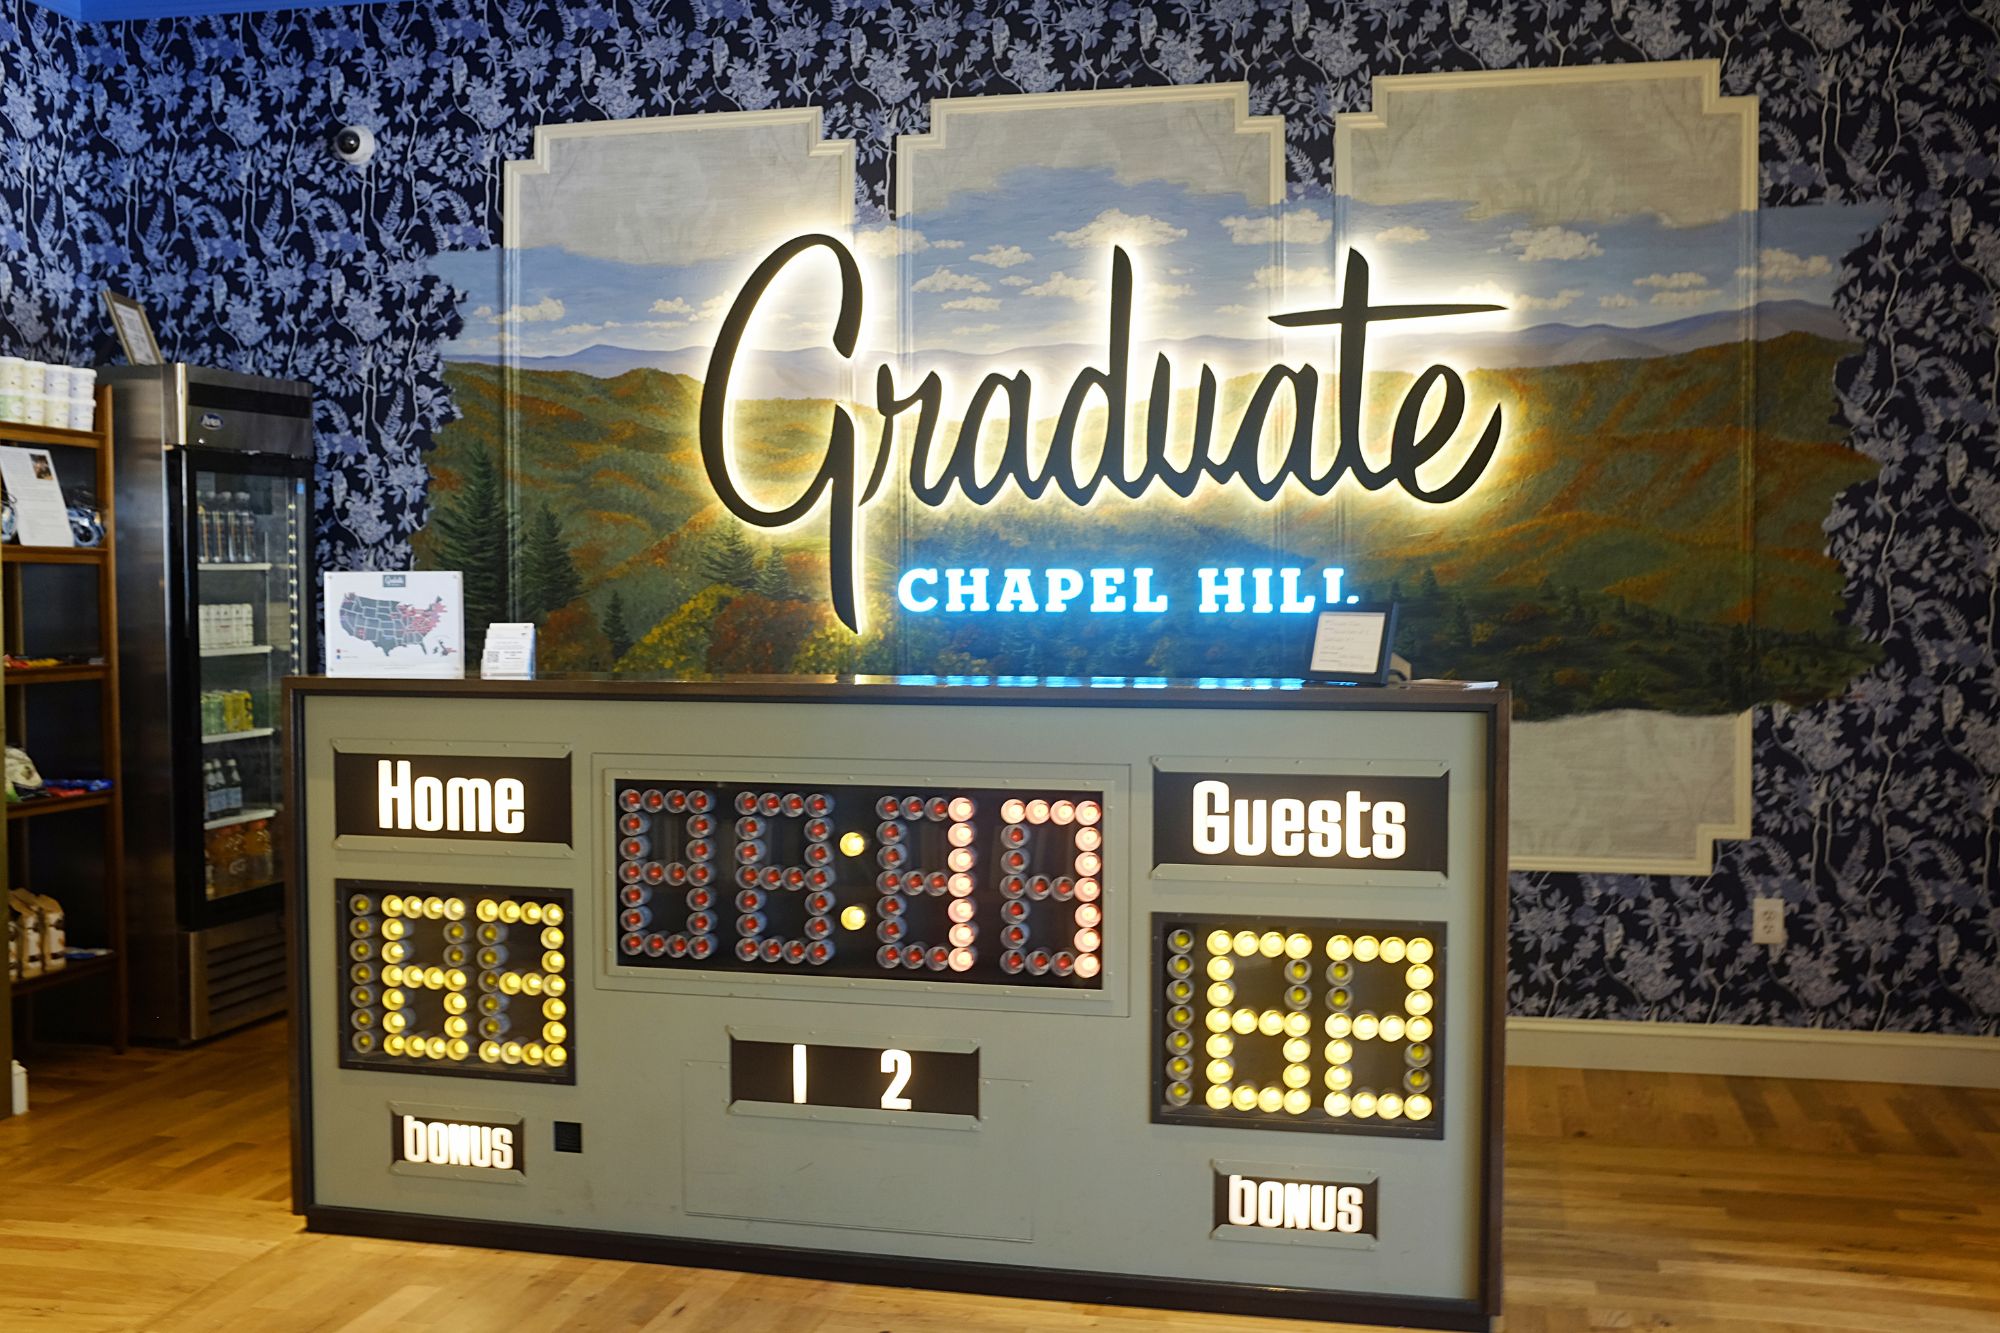 The check in desk at Graduate Chapel Hill features a basketball scoreboard